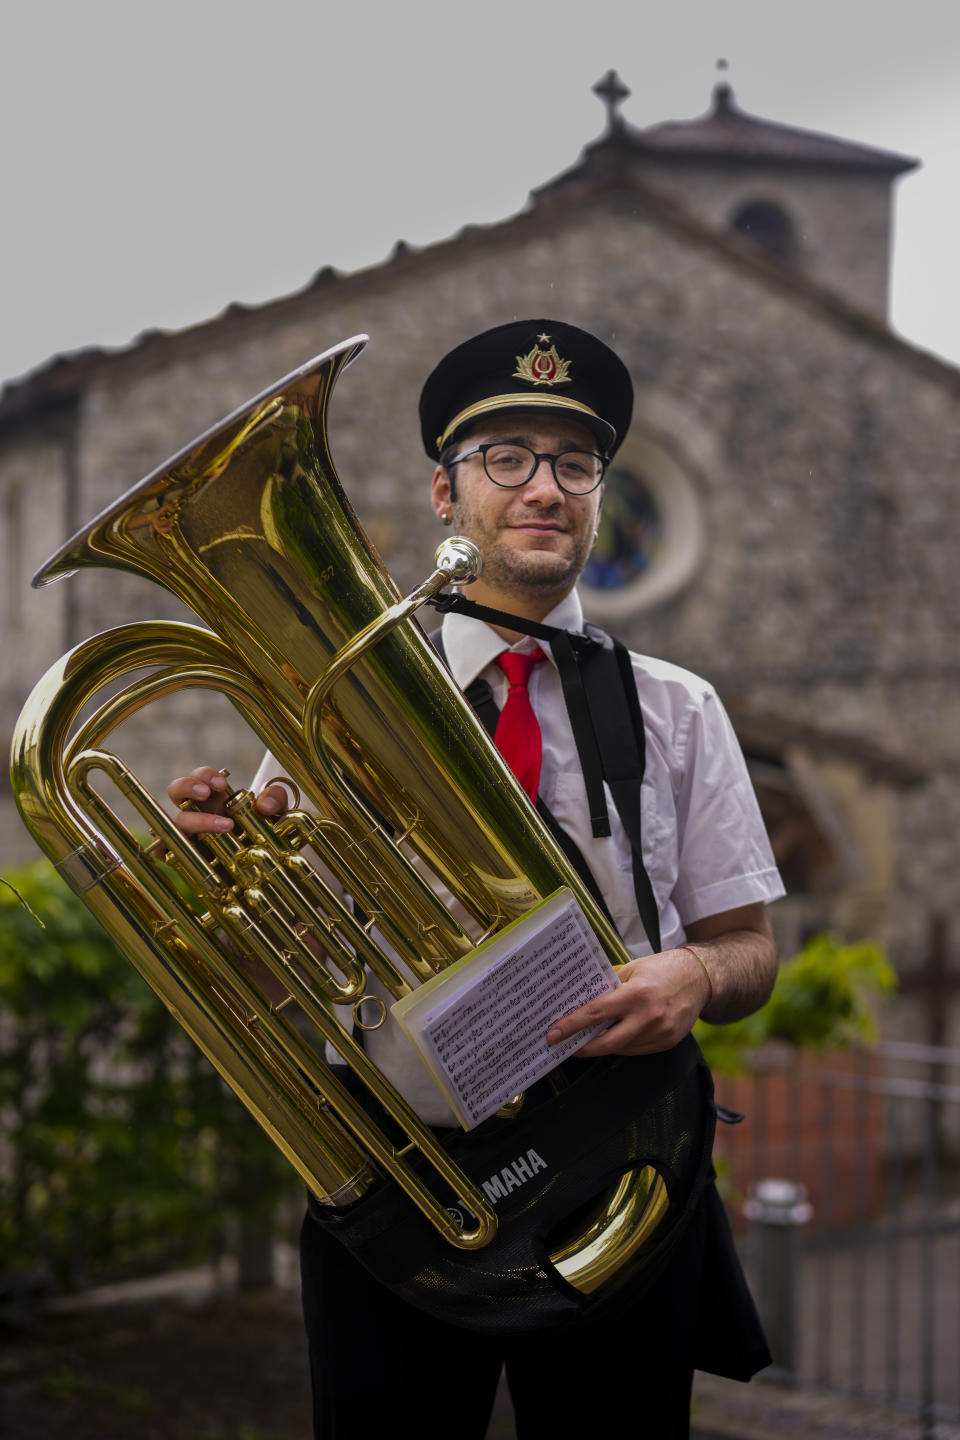 Agostino Tatulli poses with his instrument in Forca di Valle, near Teramo in central Italy, Monday, June 5, 2023. For Tatulli, a way to find meaning is music, including gigs with a marching band for the popular feasts of patron saints. This summer, he participated in two such processions over 48 hours. A weekday morning one was cut short by a rainstorm in the hamlet of Forca di Valle, high on the forested mountain ridge above Isola del Gran Sasso. (AP Photo/Domenico Stinellis)